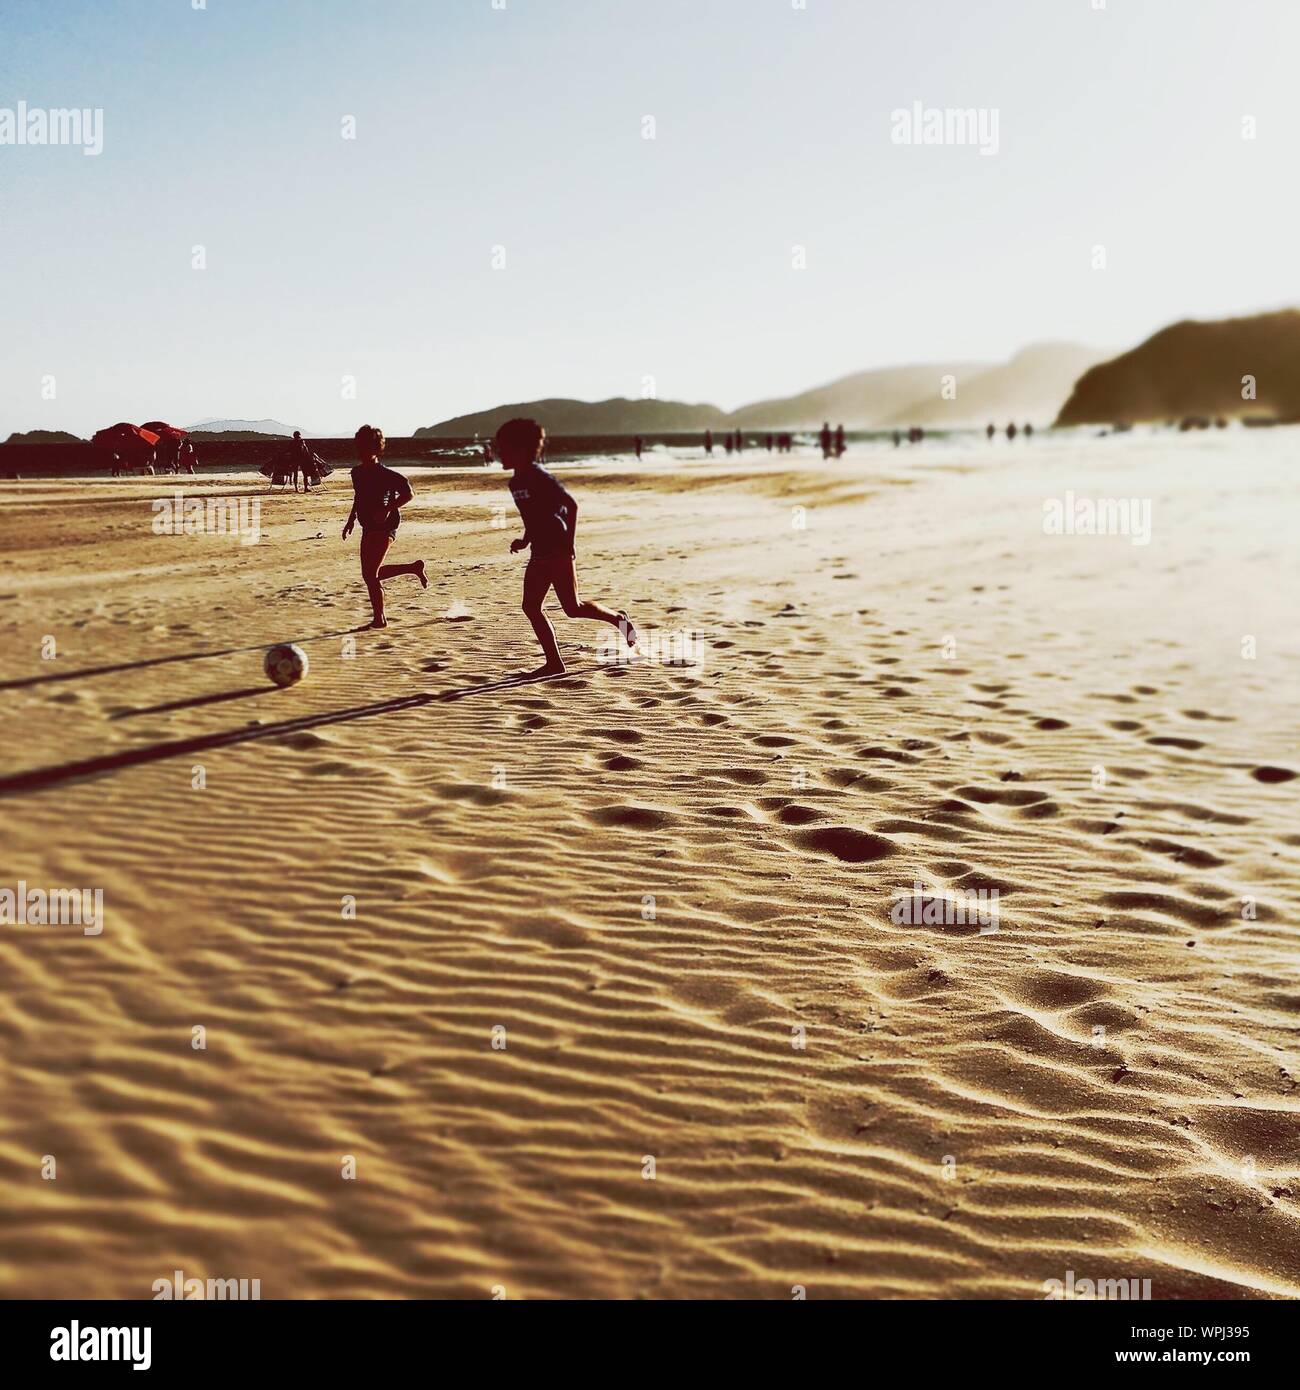 Boys Playing With ball sur plage de sable Banque D'Images